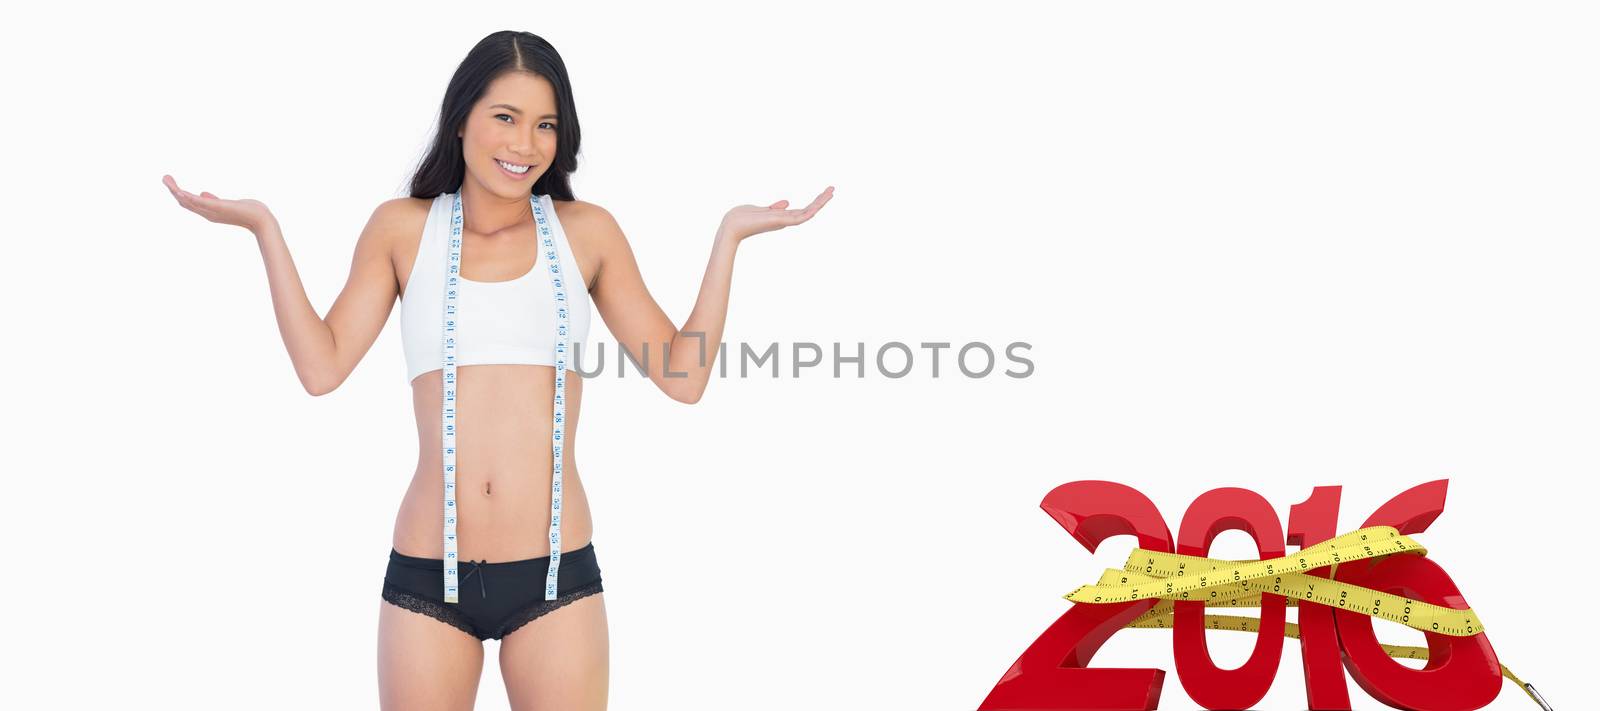 Smiling woman wearing jeans falling down because shes lost weight against white background with vignette